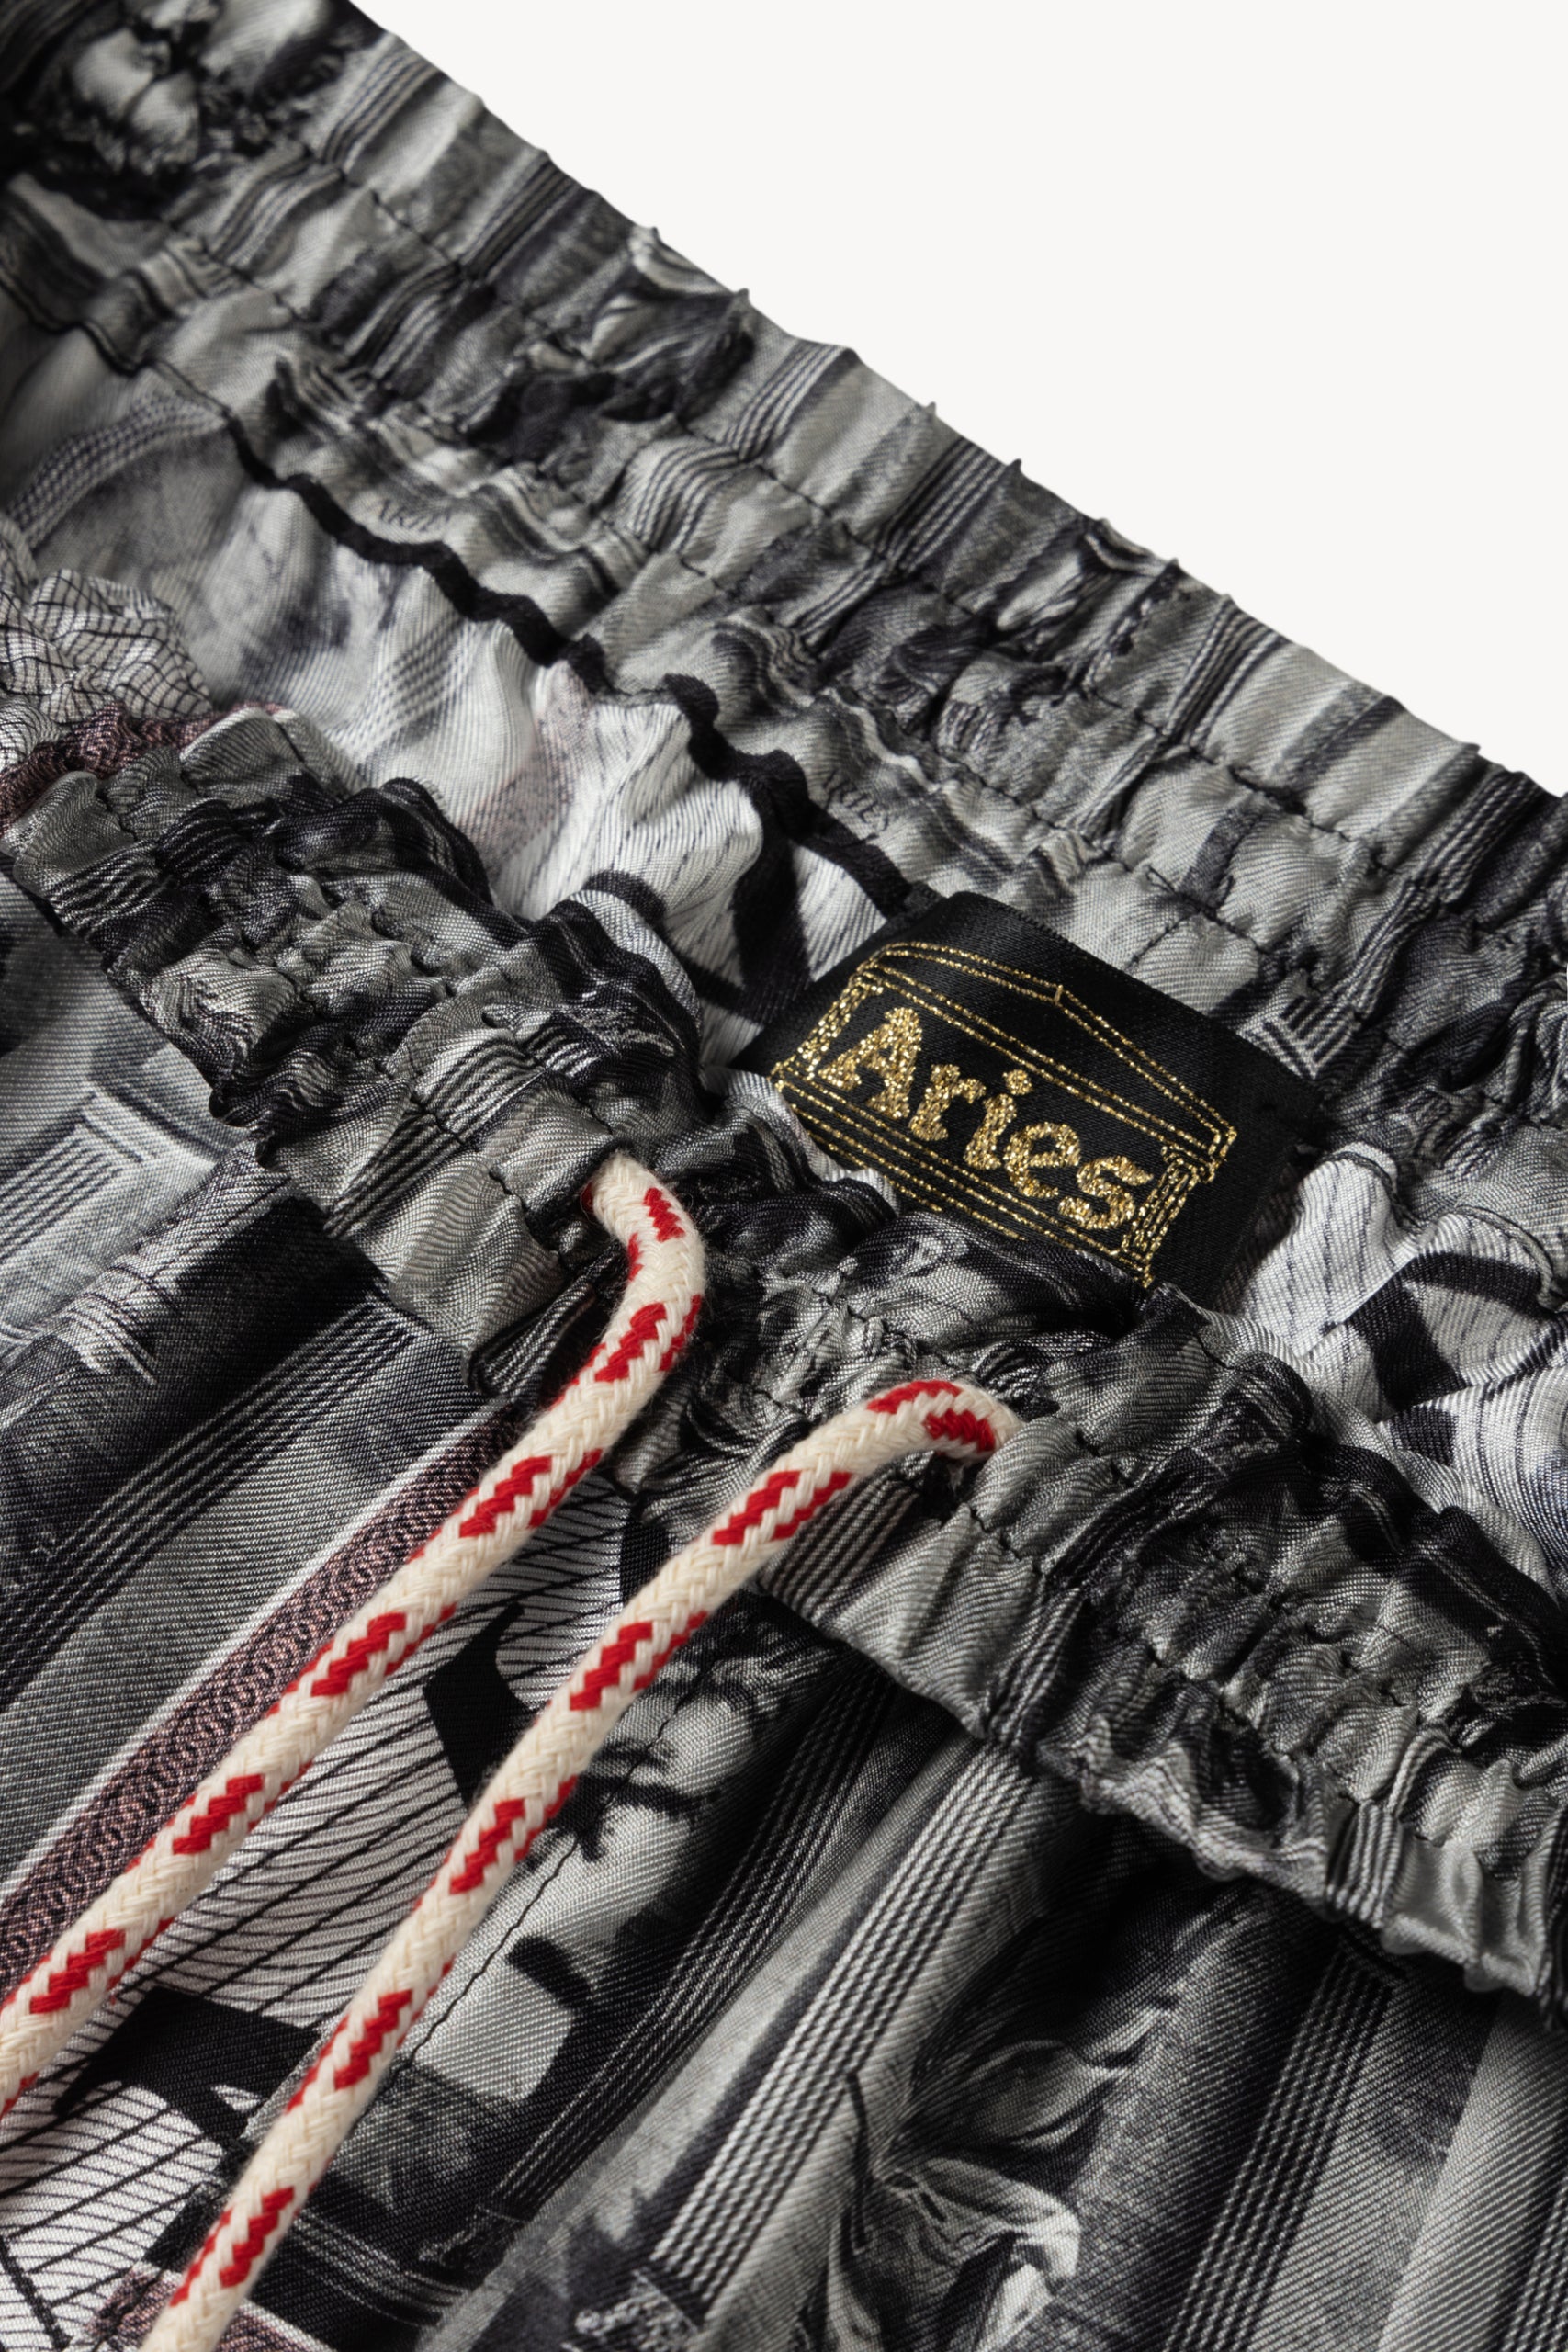 Load image into Gallery viewer, AS Roma X Aries Statue Silk Shorts